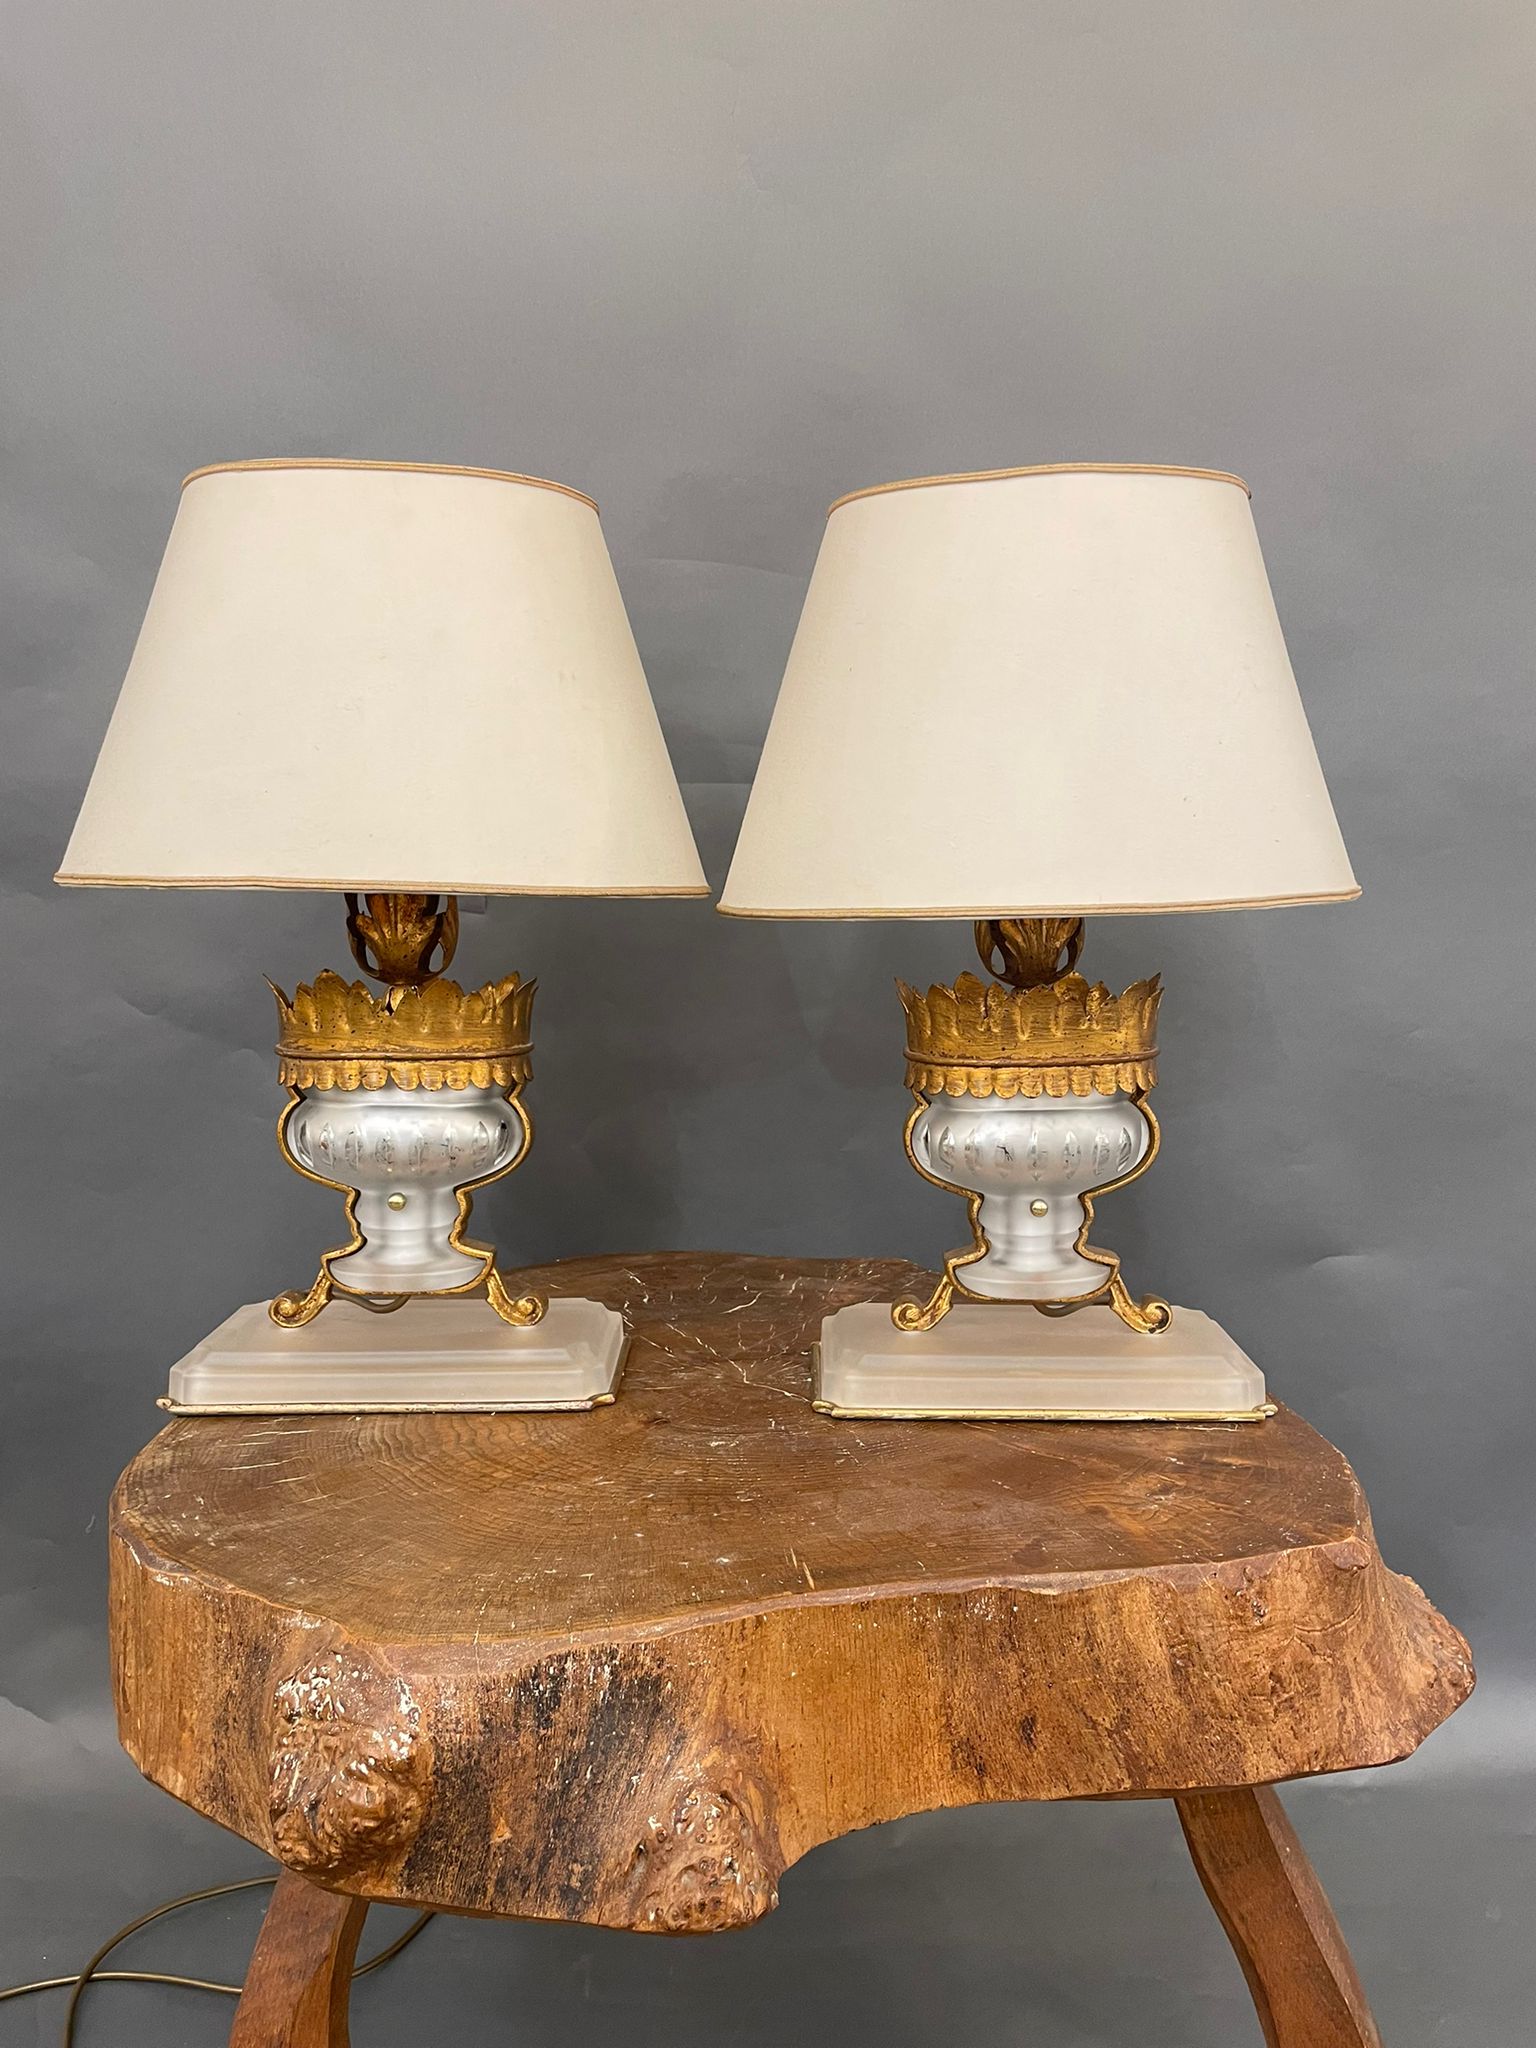 Pair of Table Lamps in the Style of Maison Bagues